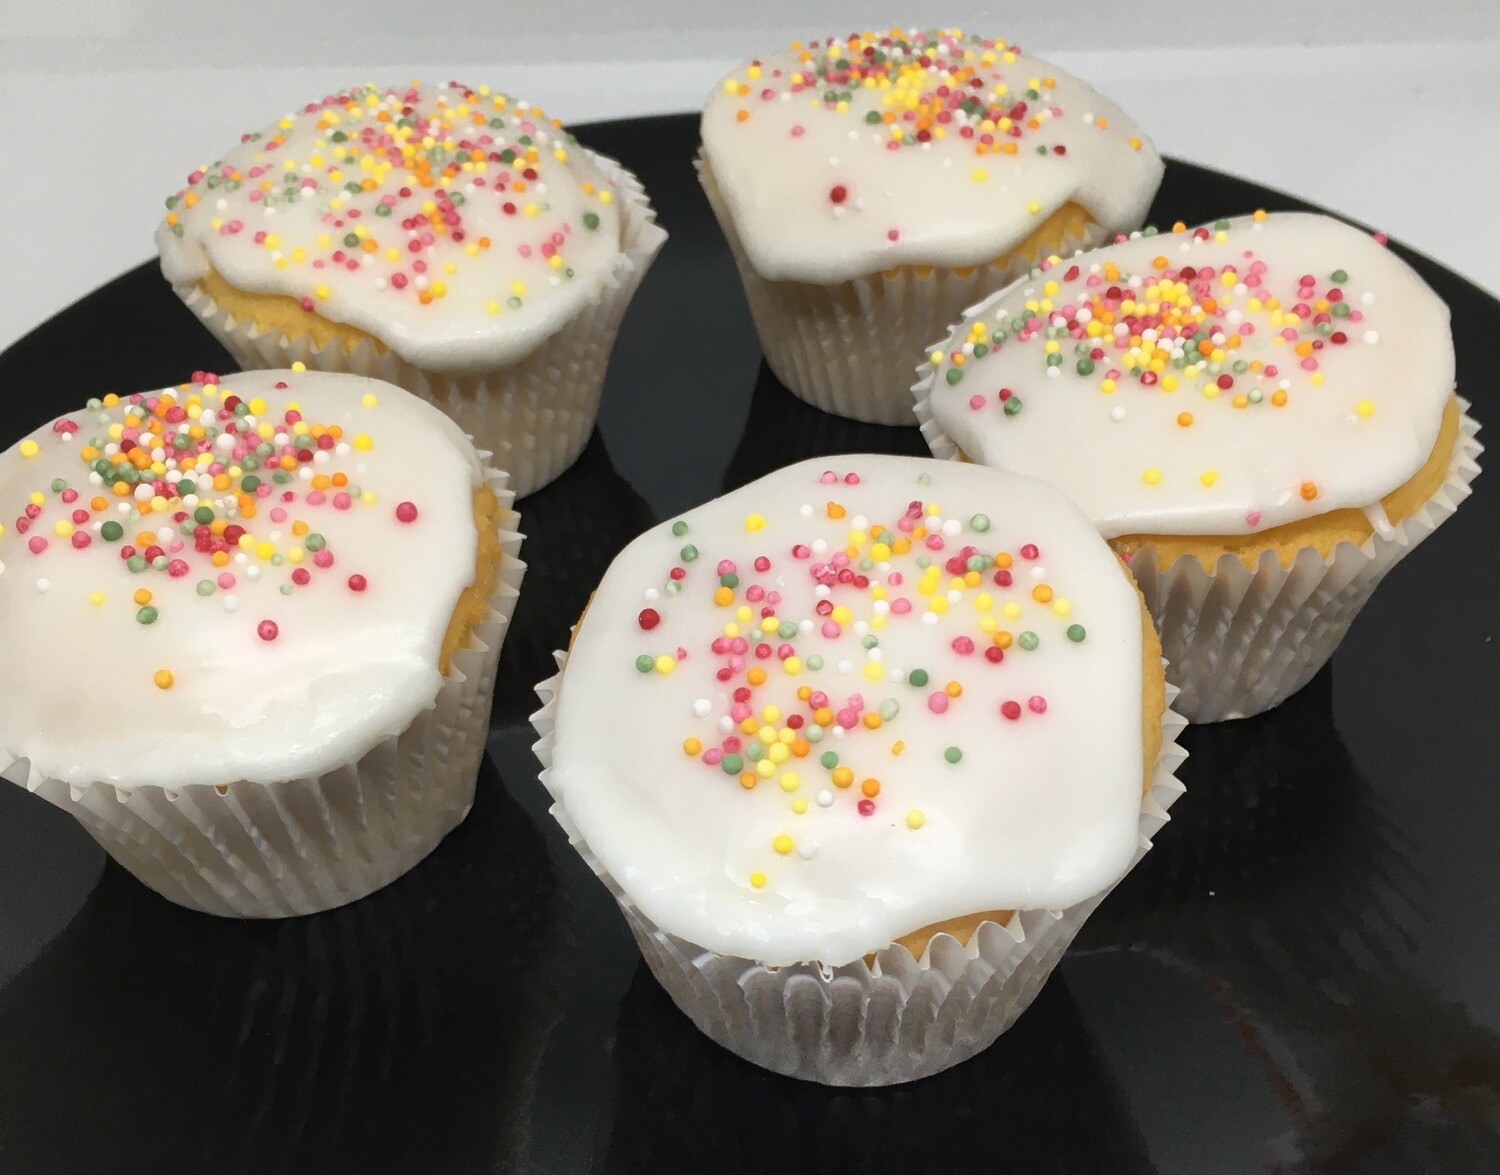 Rick Grant's Cup Cake Mix. You've tried the rest, now try the best!
So light and fluffy. Ideal for school, work or Birthdays. GF, DF, FODMAP.